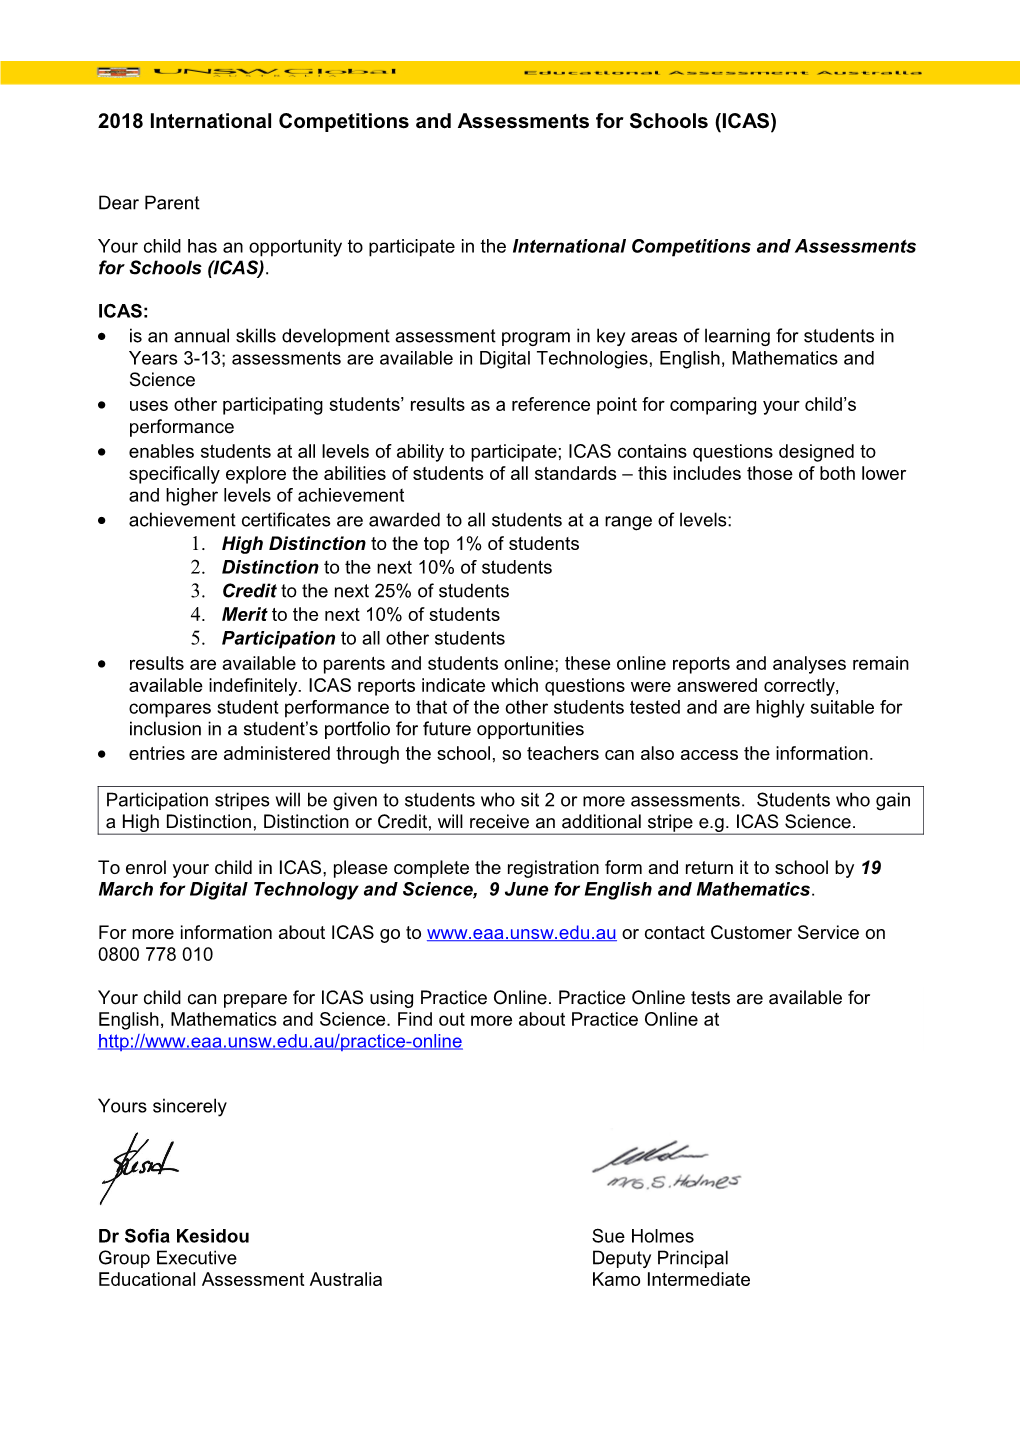 2018 International Competitions and Assessmentsfor Schools (ICAS)